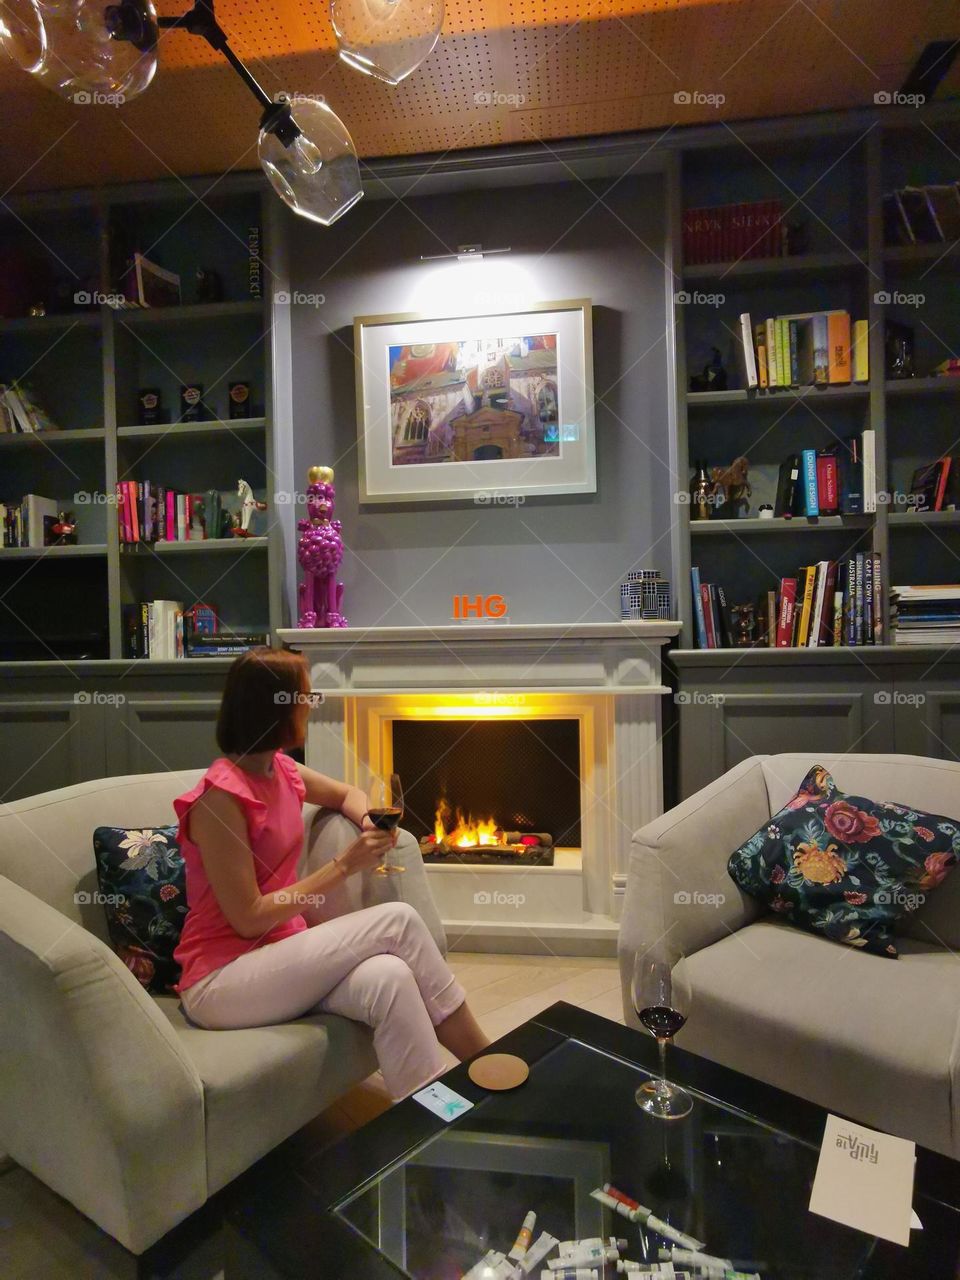 Cozy and lovely place. A woman with a glass of wine looks at the fireplace. Room for reading and relaxation.